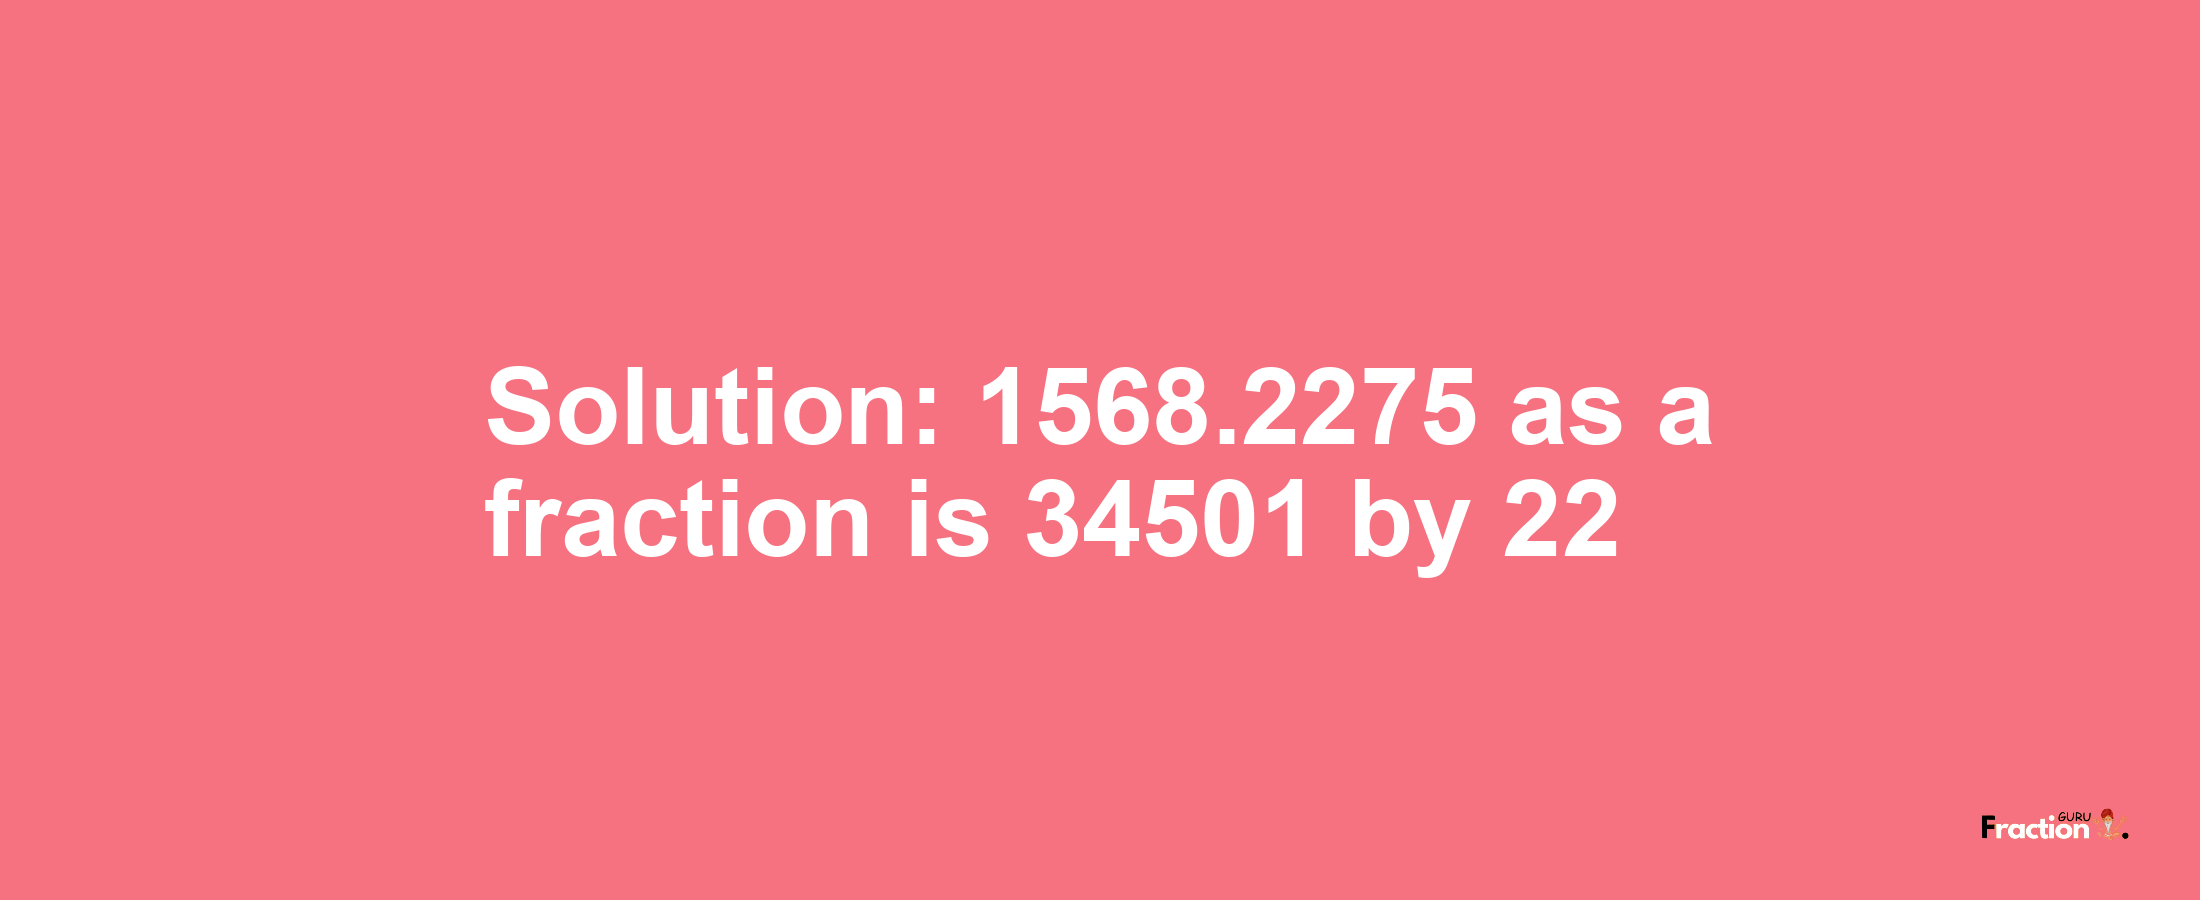 Solution:1568.2275 as a fraction is 34501/22